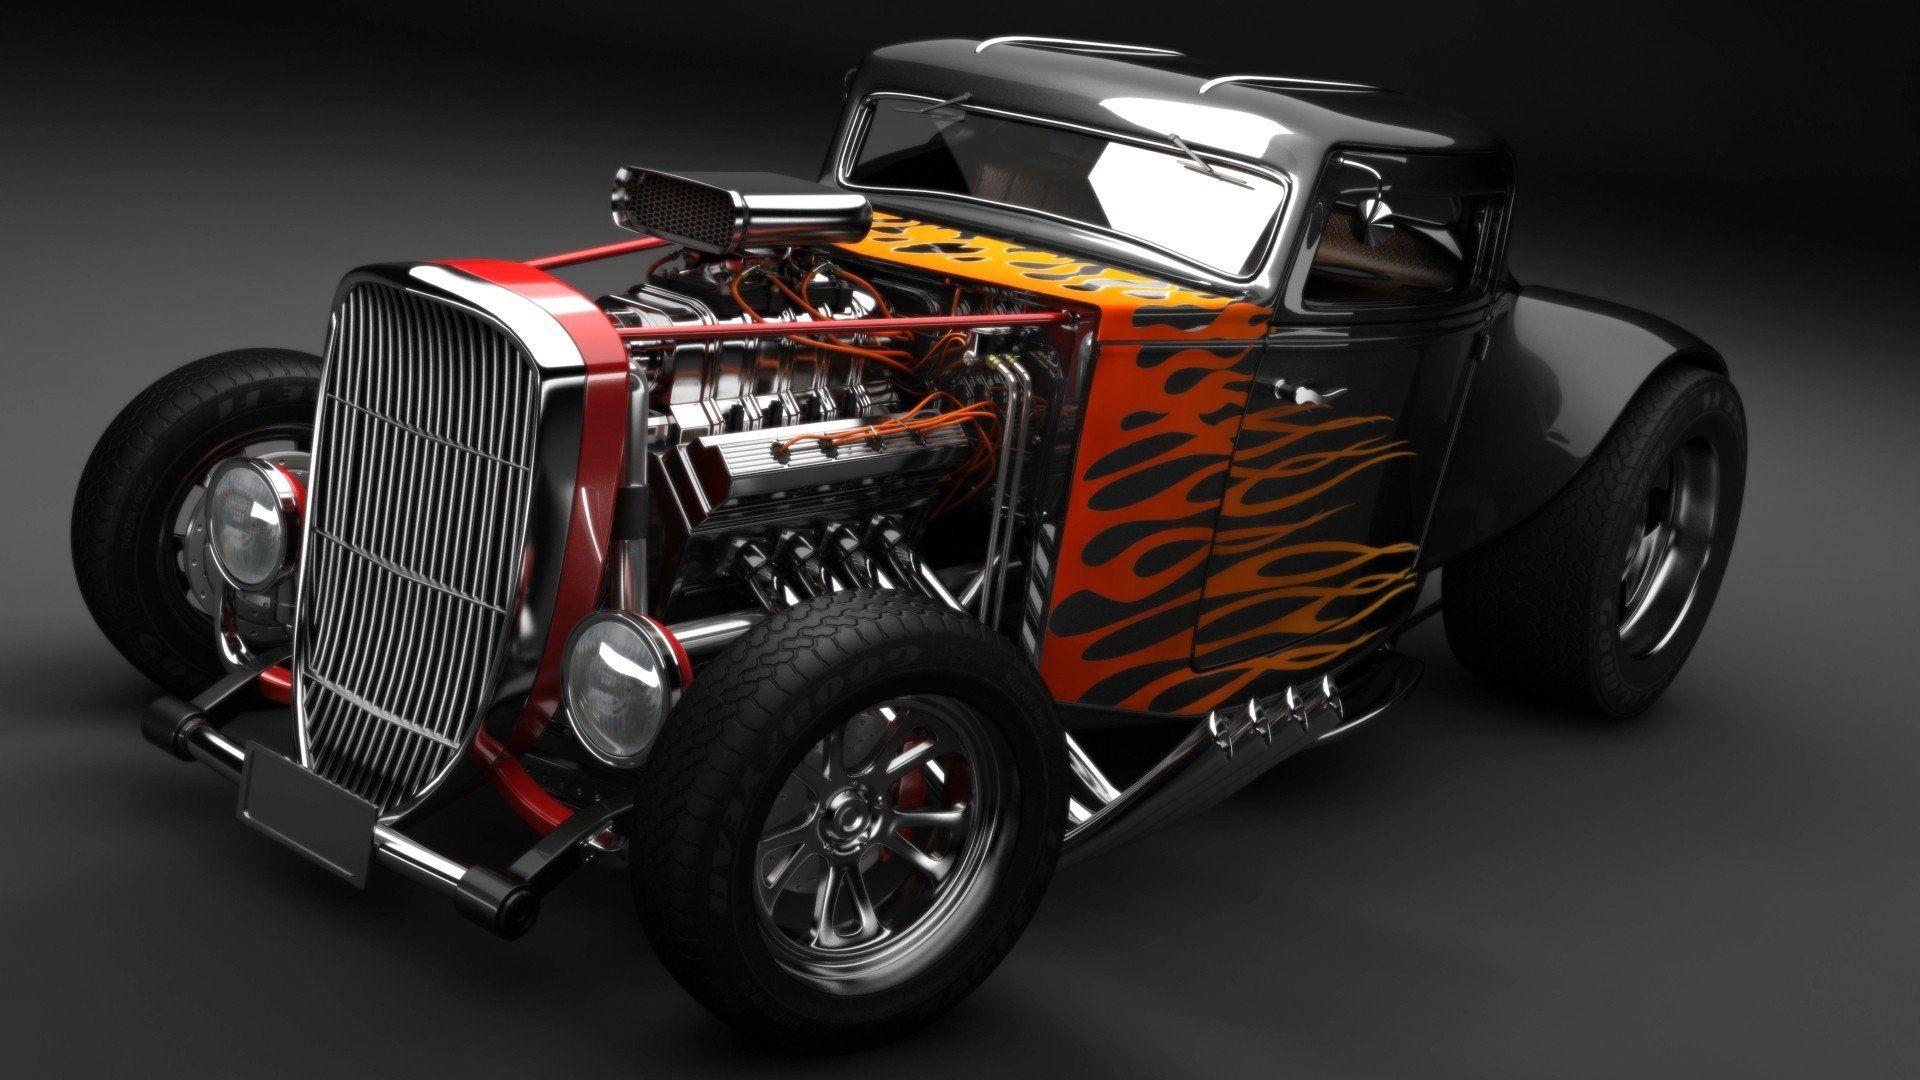 Hot Rod Wallpapers - Top Free Hot Rod